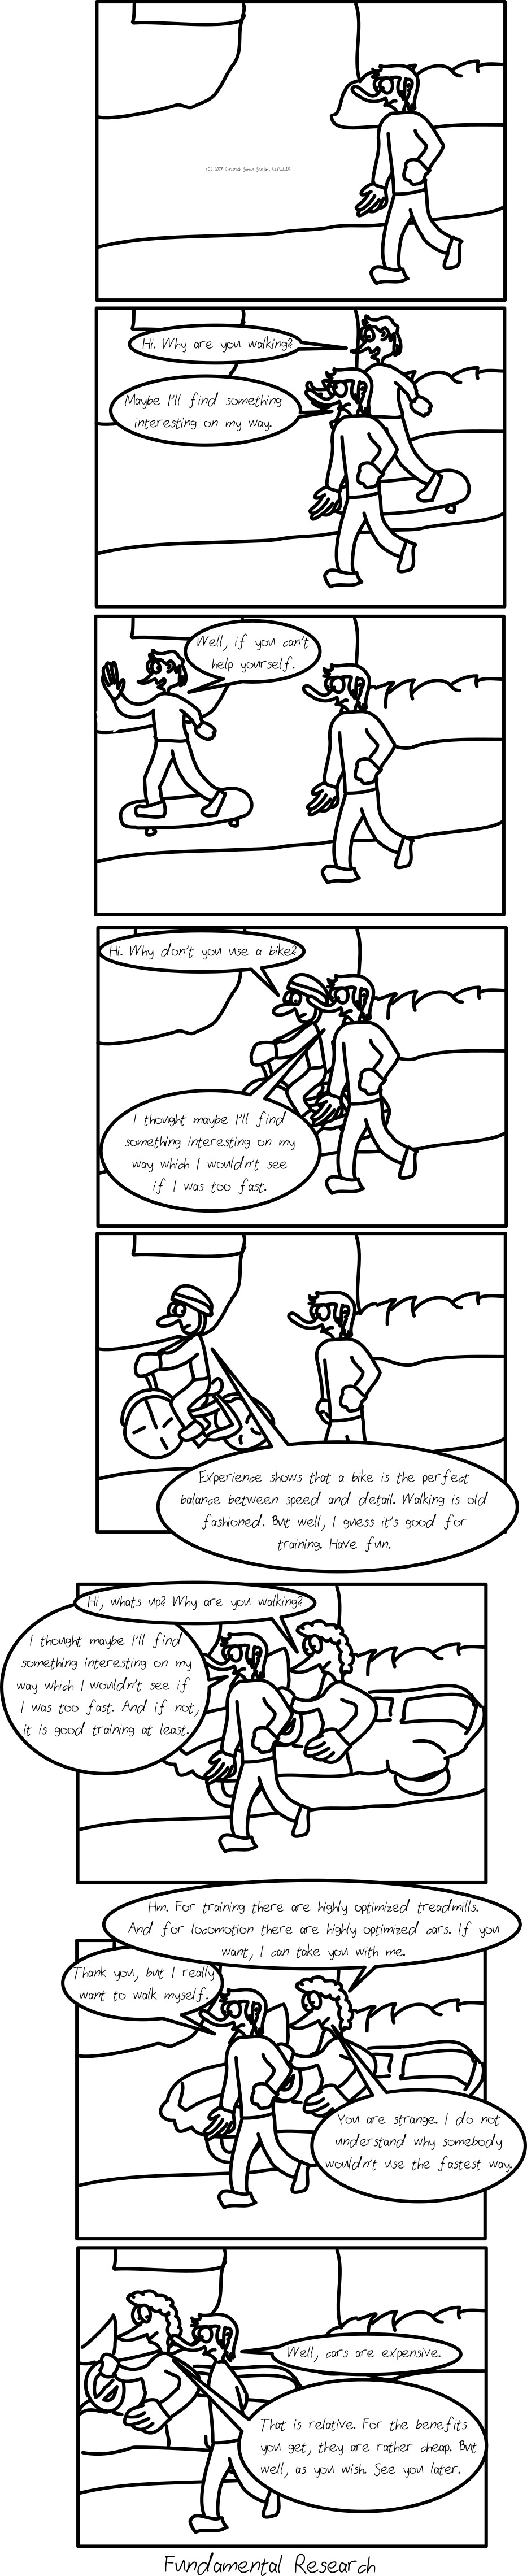 Panel 1: A person is walking on a sidewalk. -- Panel 2-3: A person on a skateboard comes by and says "Hi. Why are you walking?" The walking person answers "Maybe I'll find something interesting on my way." The person on the skateboard moves away and waves his hand, saying "Well, if you can't help yourself." -- Panel 4-5: A person on a bike comes by, saying "Hi. Why don't you use a bike?" The person on the sidewalk answers "I thought maybe I'll find something interesting on my way which I wouldn't see if I was too fast." The person on the bike says "Experience shows that a bike is the perfect balance between speed and detail. Walking is old-fashioned. But well, I guess it's good for training. Have fun." -- Panel 6-8: A person in a car comes by, saying "Hi, whats up? Why are you walking?" The person on the sidewalk answers "I thought maybe I'll find something interesting on my way which I wouldn't see if I was too fast. And if not, it is good training at least." The person in the car says "Hm. For training there are highly optimized treadmills. And for locomotion there are highly optimized cars. If you want, I can take you with me." The person on the sidewalk says "Thank you, but I really want to walk myself." The person in the car says "You are strange. I do not understand why somebody wouldn't use the fastest way." The person on the sidewalk says "Well, cars are expensive." The person in the car drives away, saying "That is relative. For the benefits you get, they are rather cheap. But well, as you wish. See you later." Subtitle: "Fundamental Research"